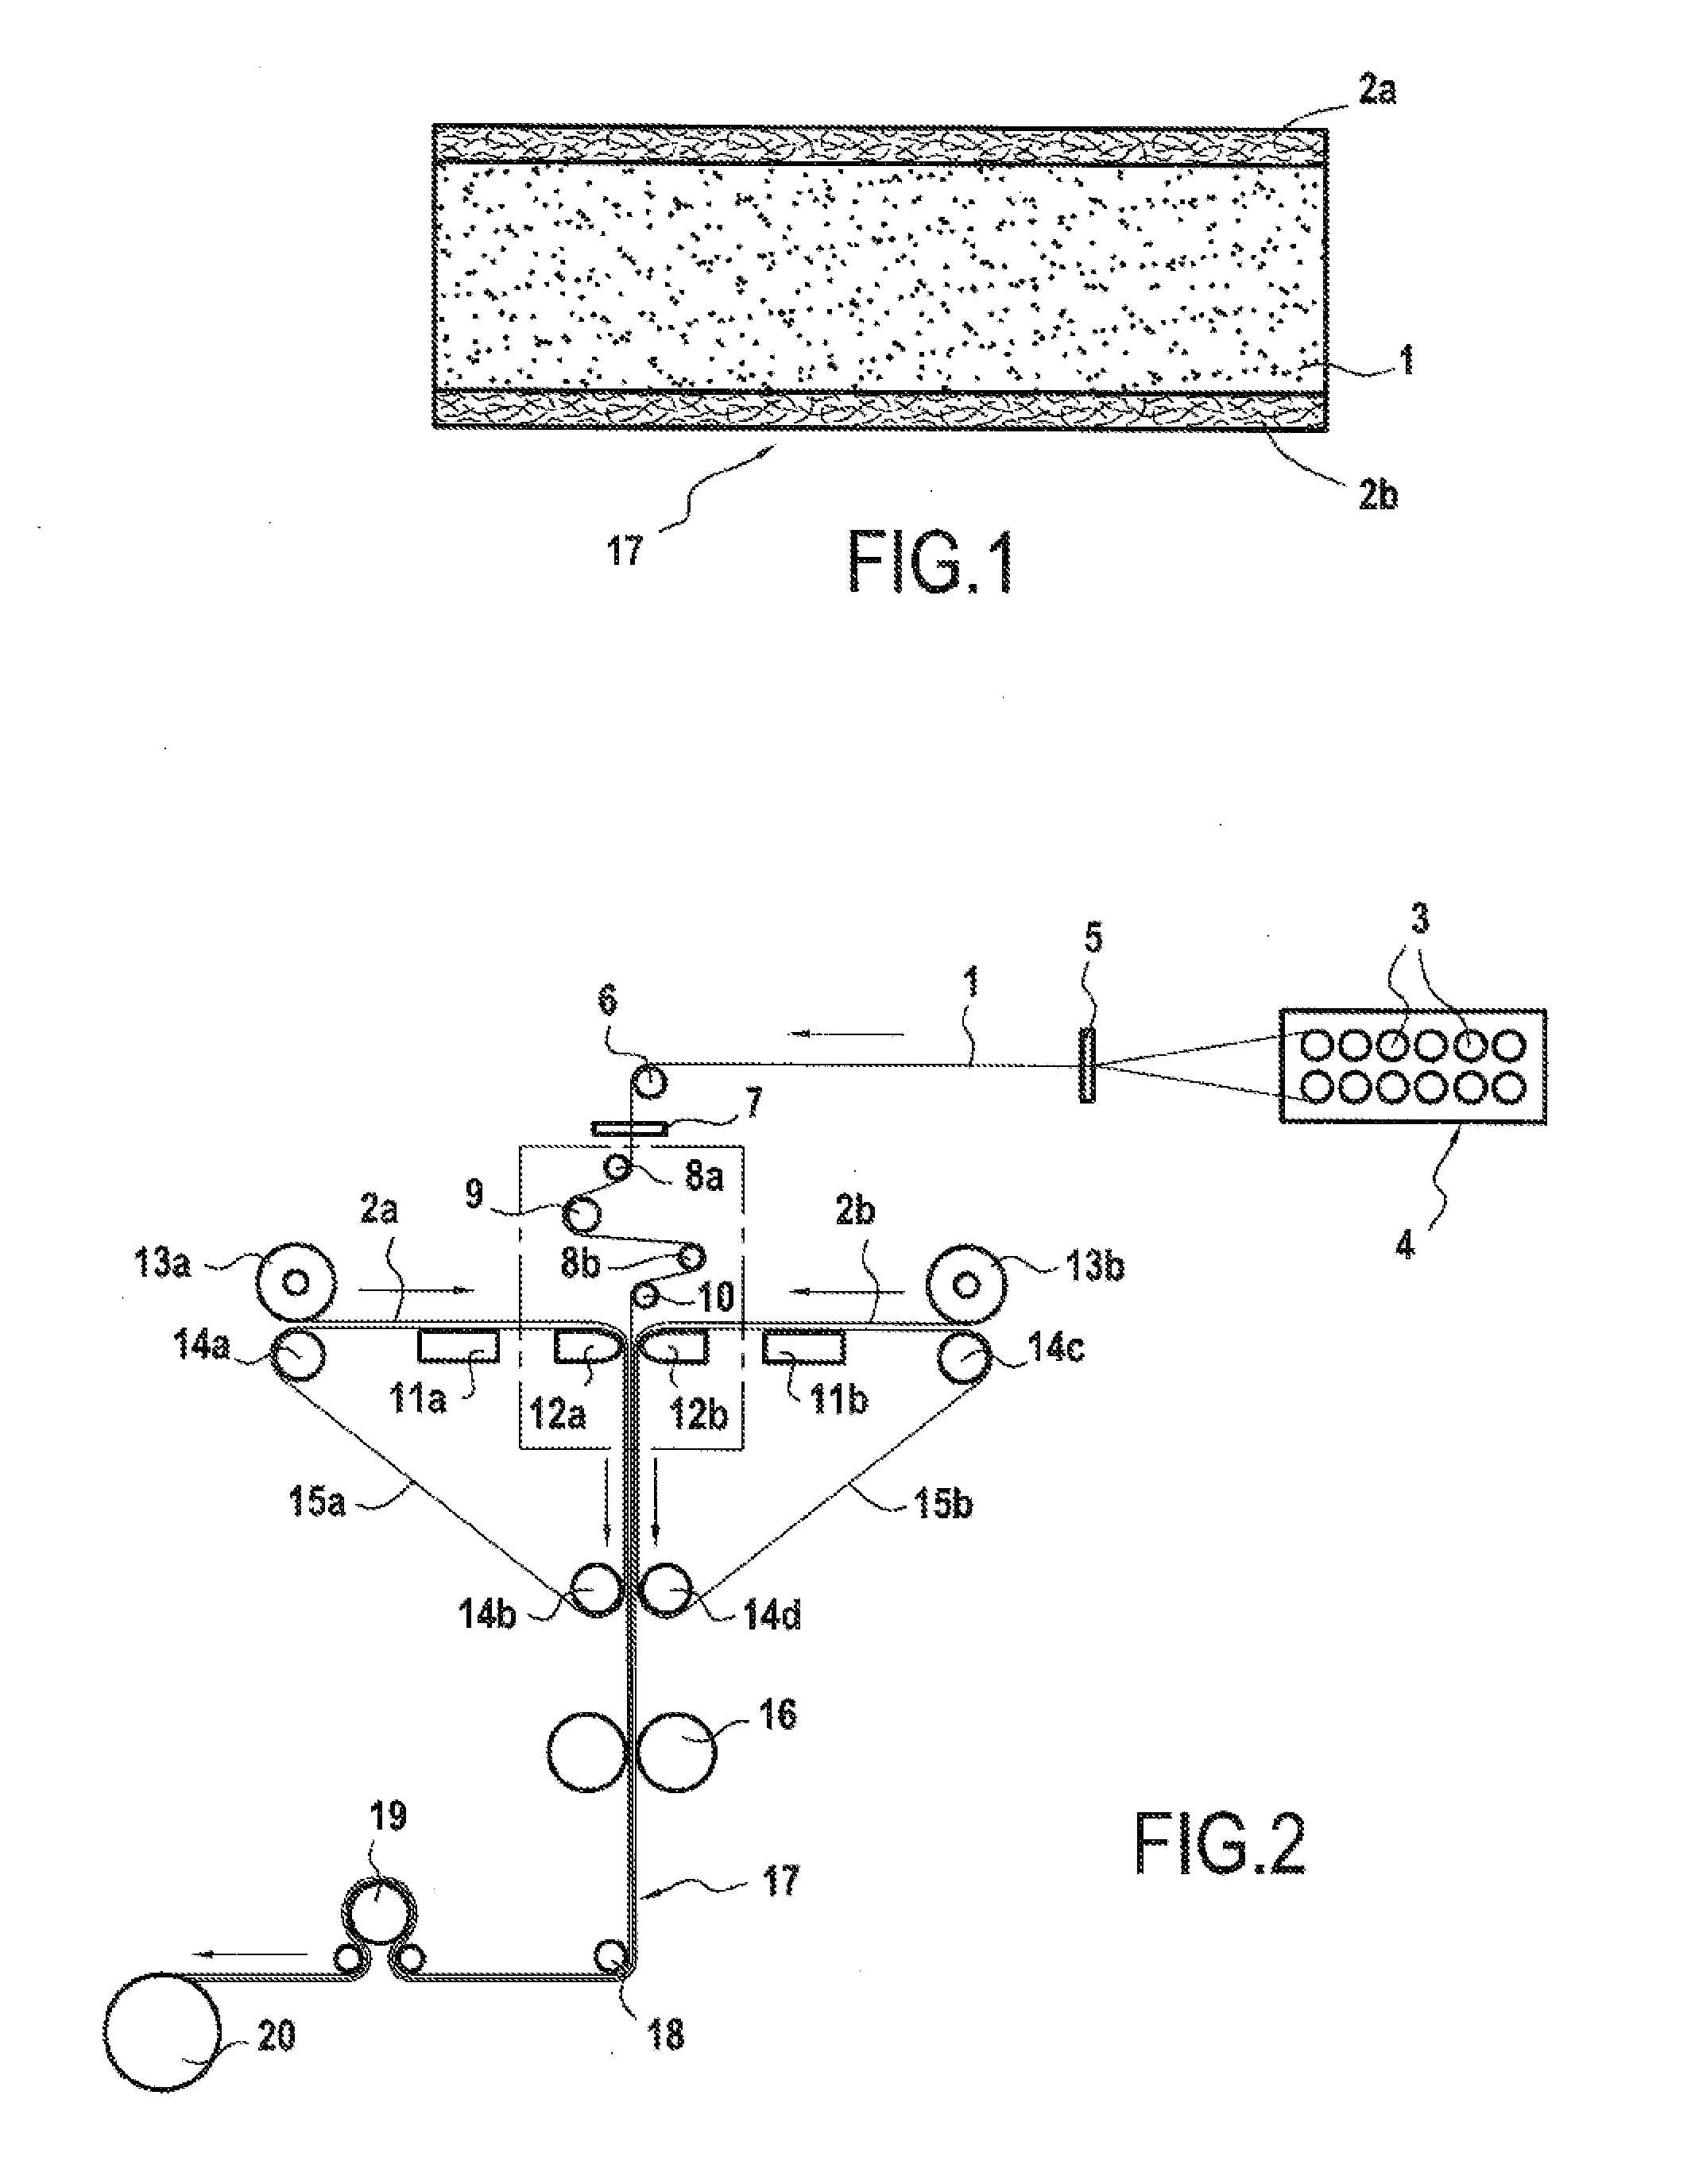 Fibrous preforms for use in making composite parts